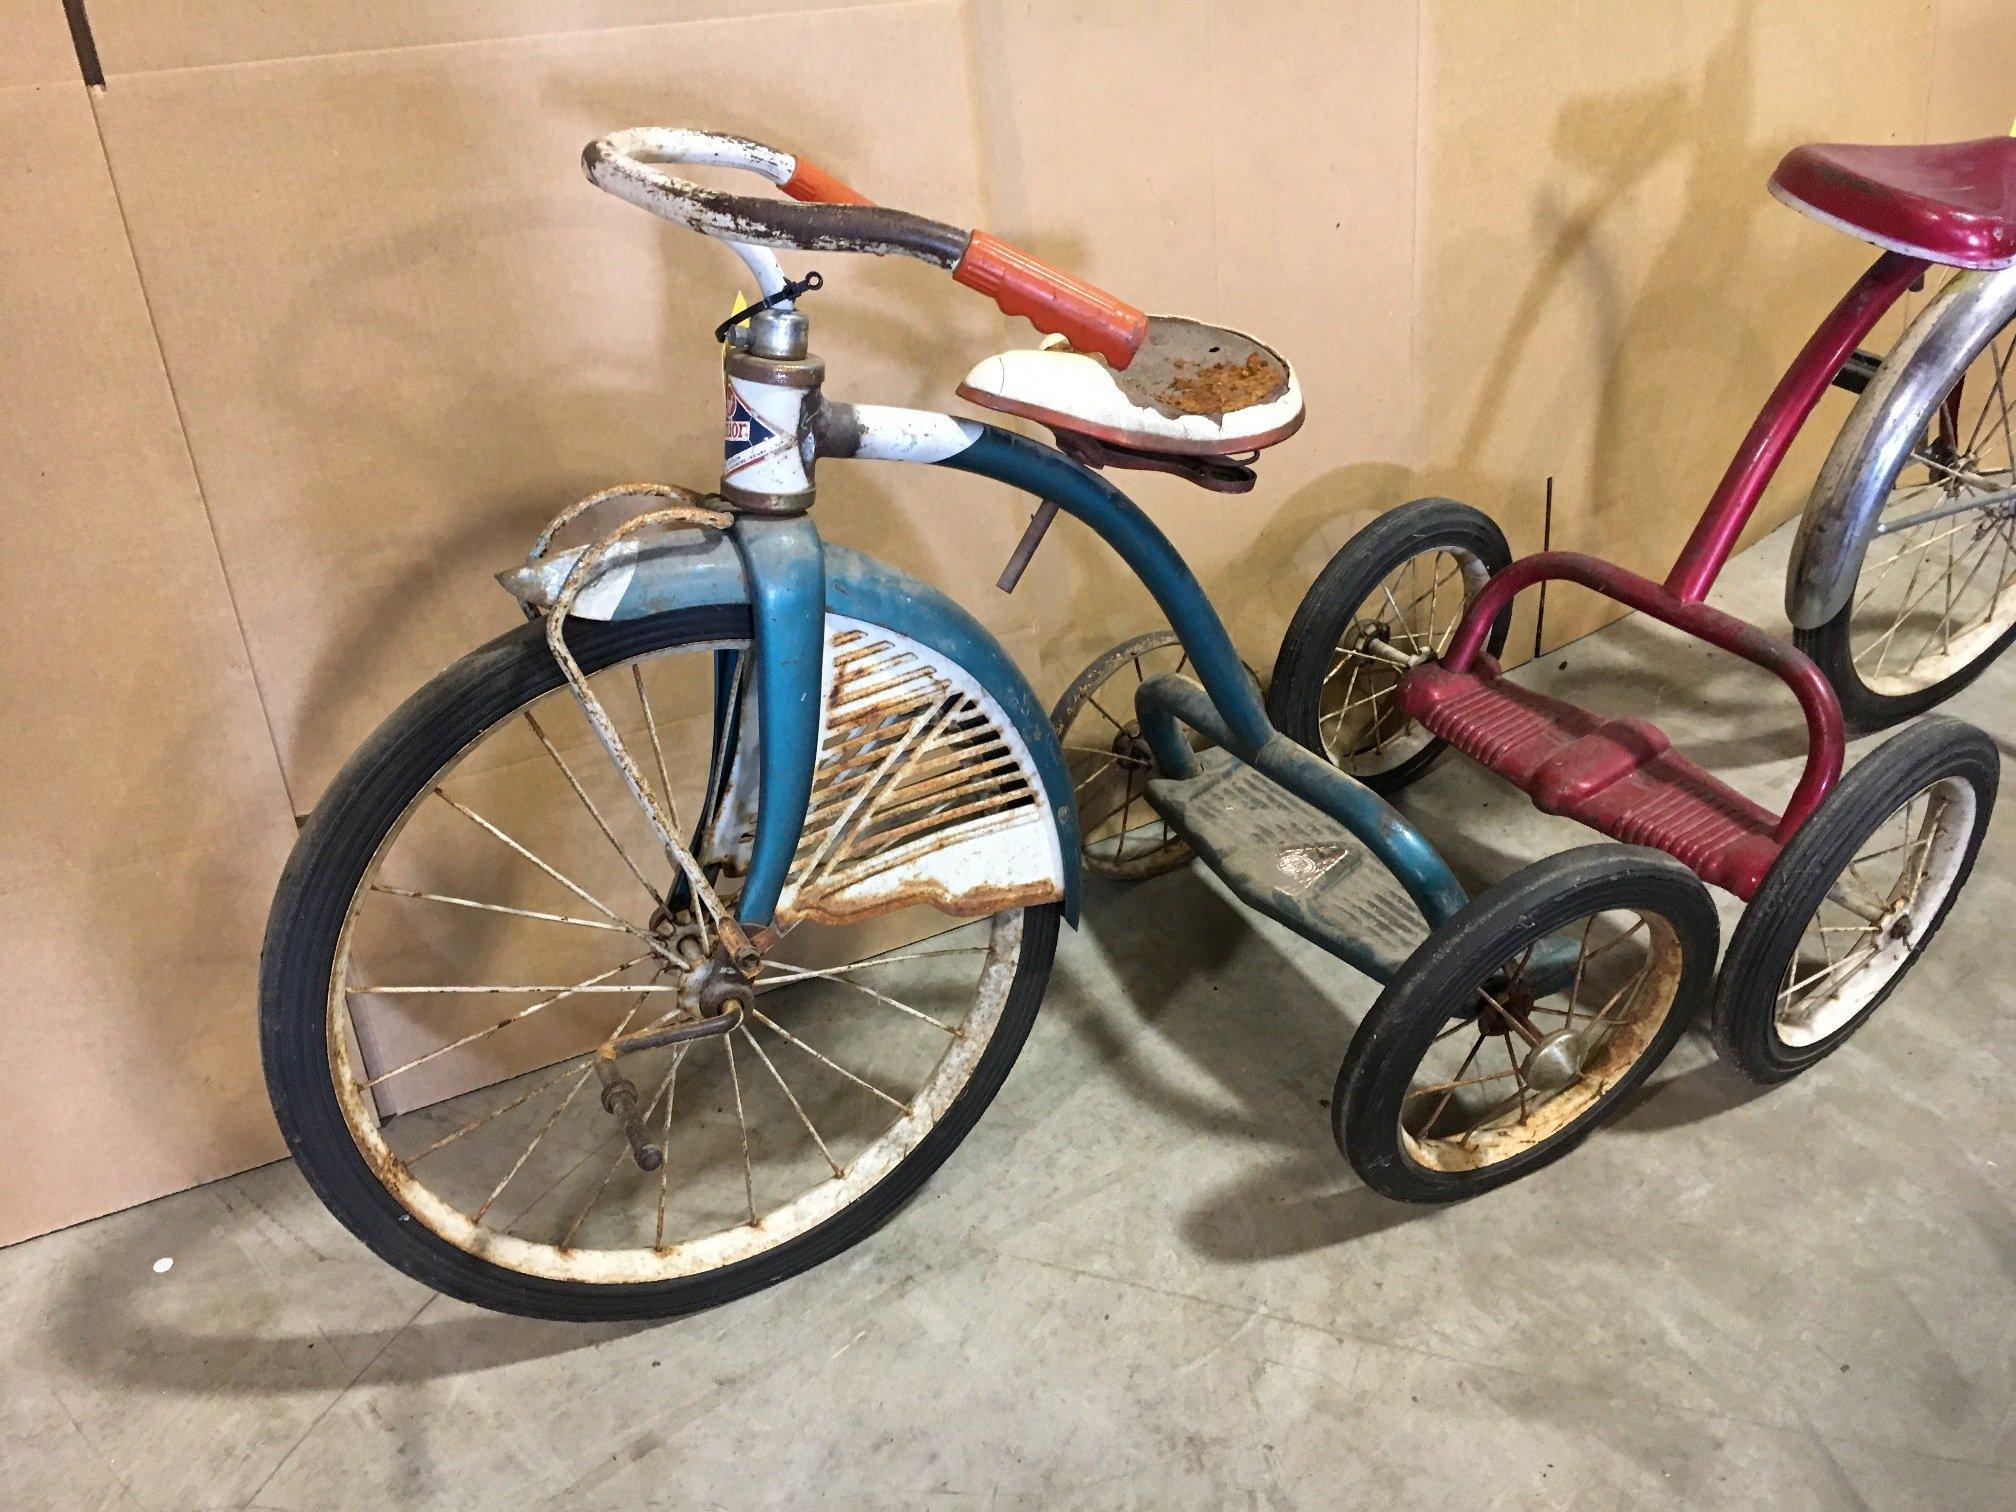 Lot of 2 vintage tricycles